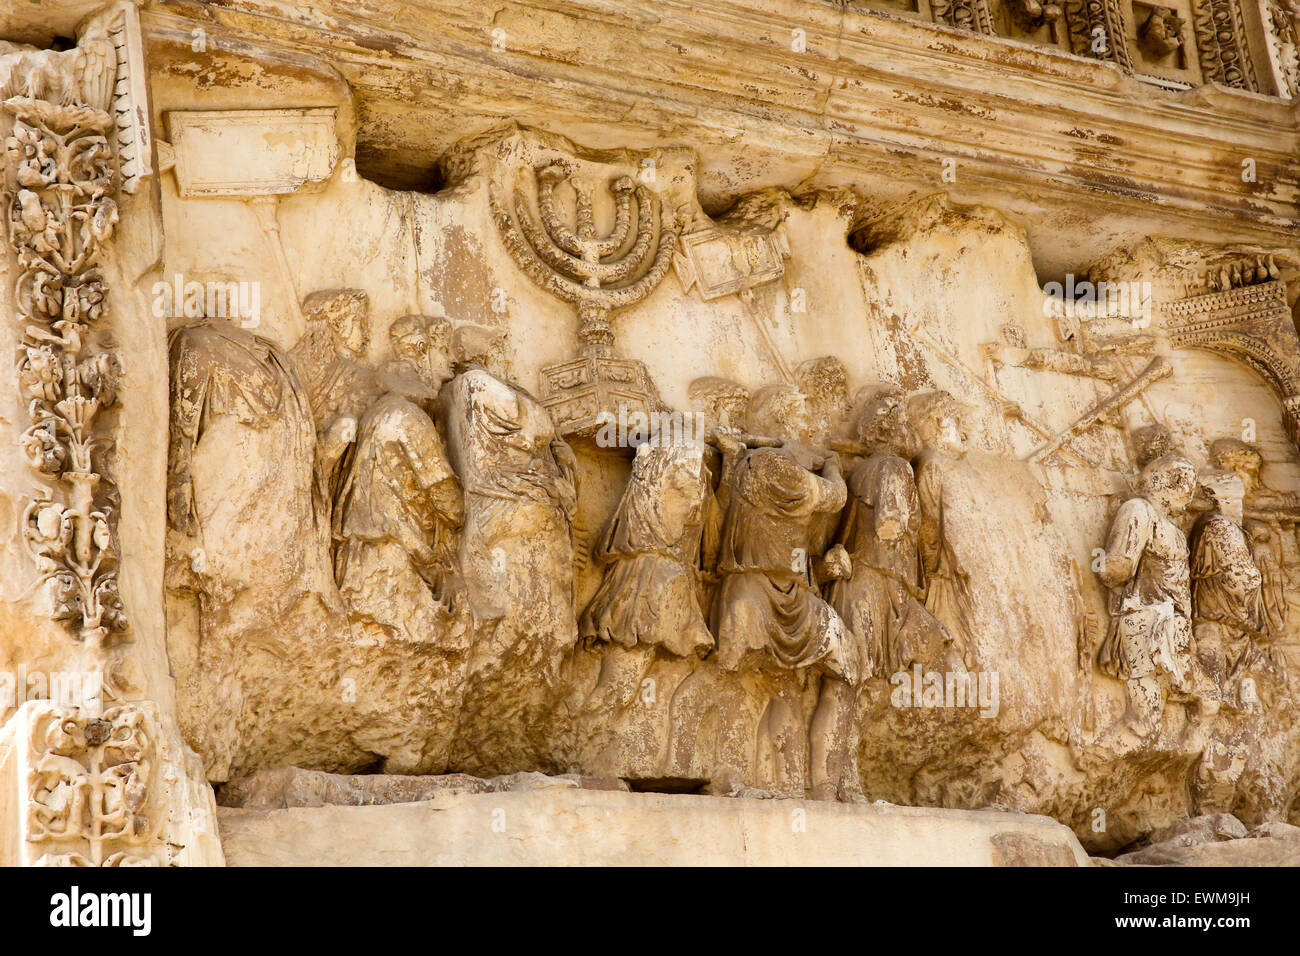 Arch of Titus showing the Emperor's victory over Judea in 70 AD. Stock Photo